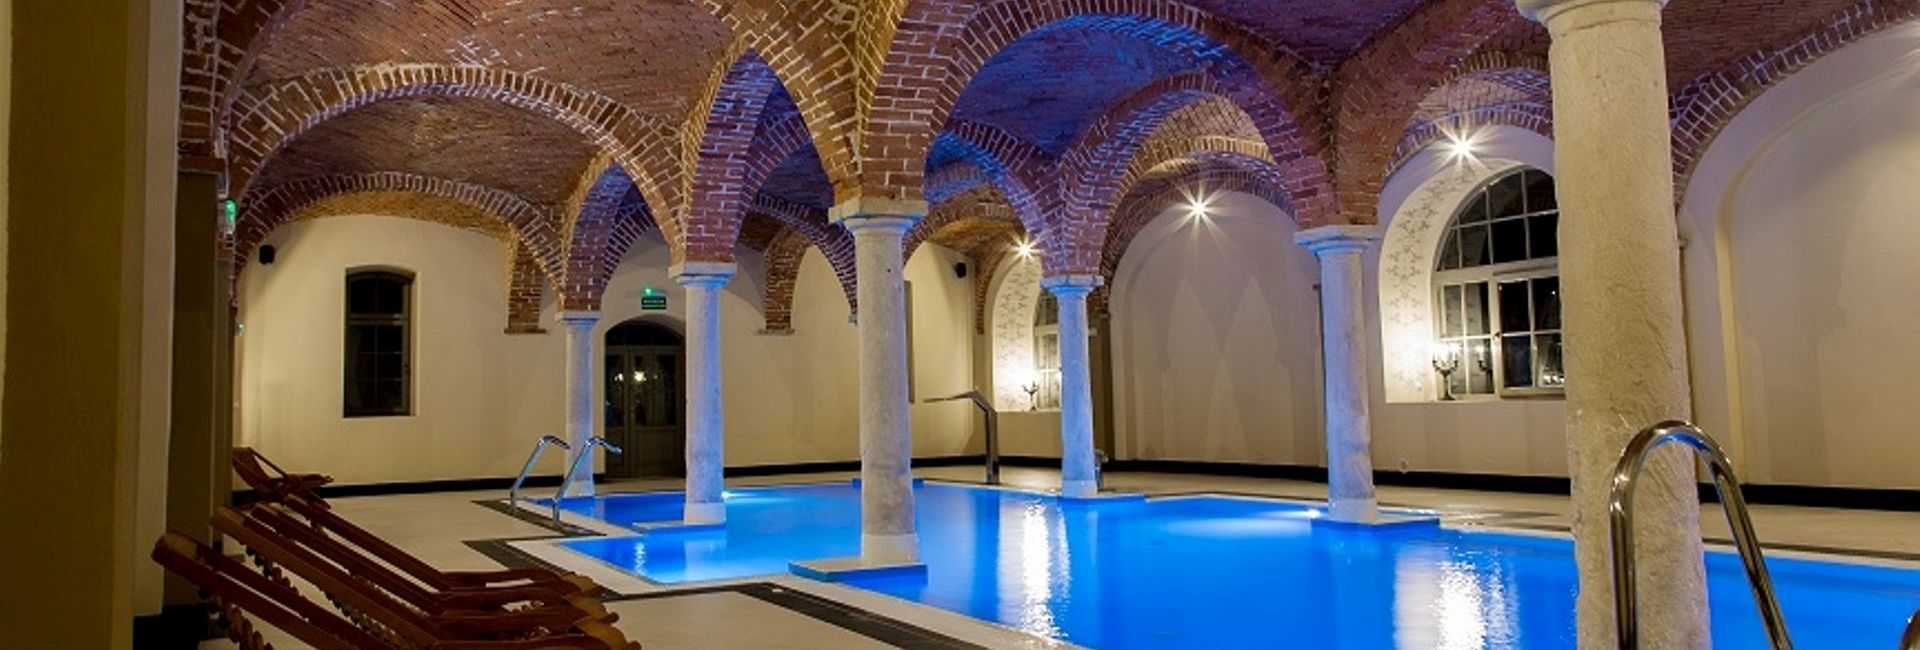 Indoor pool under vaults and arcades at Wiechlice Palace in Silesia